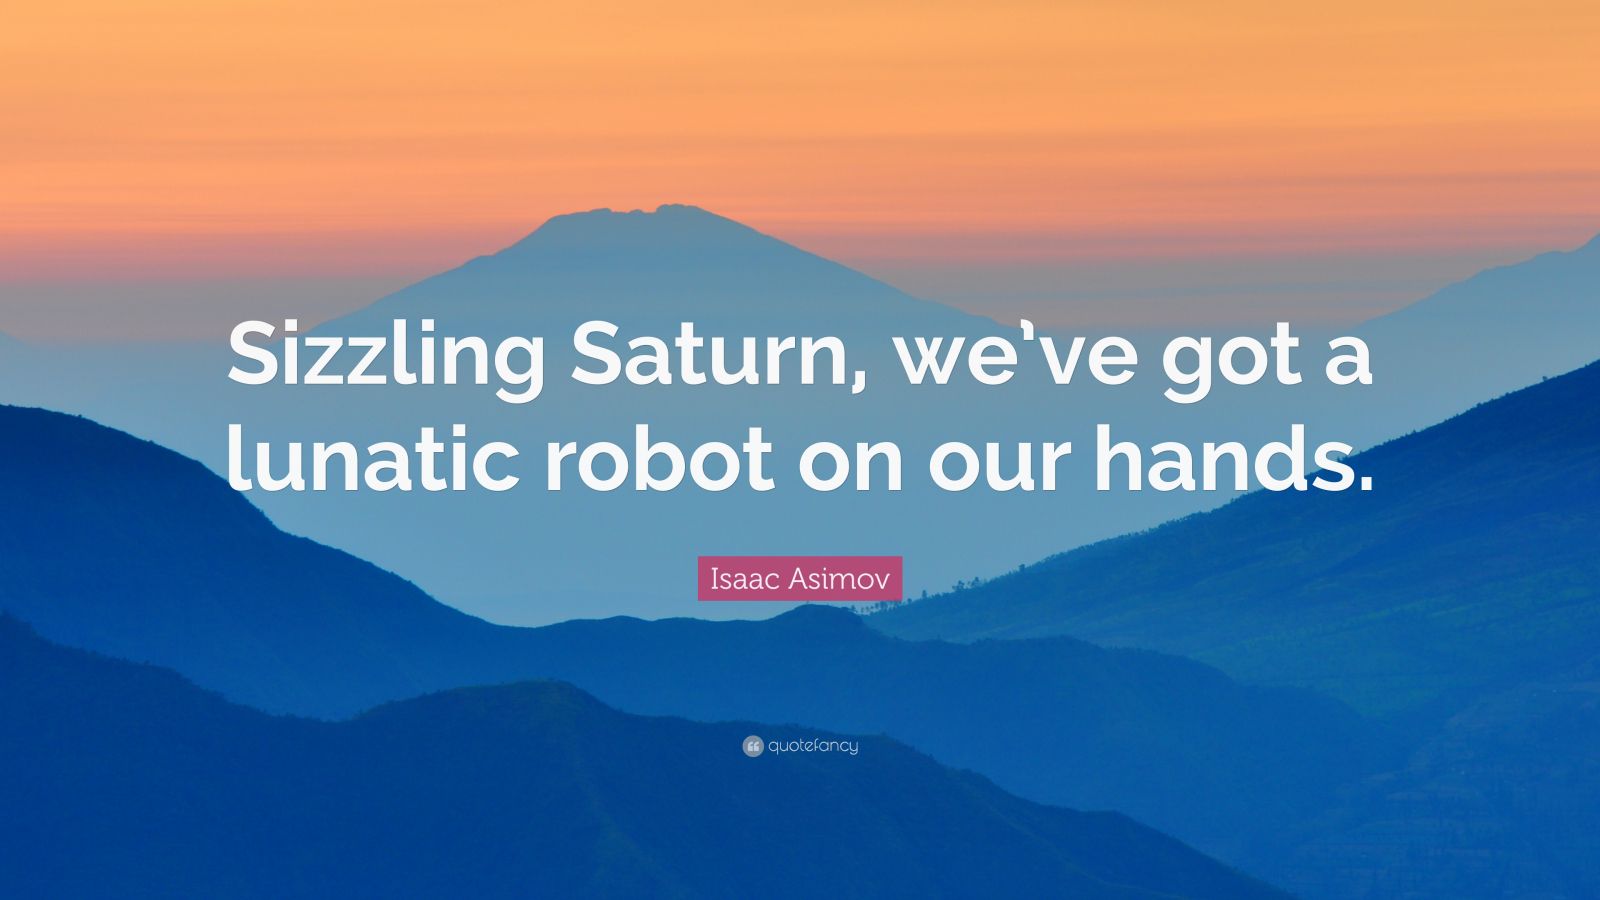 Isaac Asimov Quote “sizzling Saturn Weve Got A Lunatic Robot On Our Hands” 6240